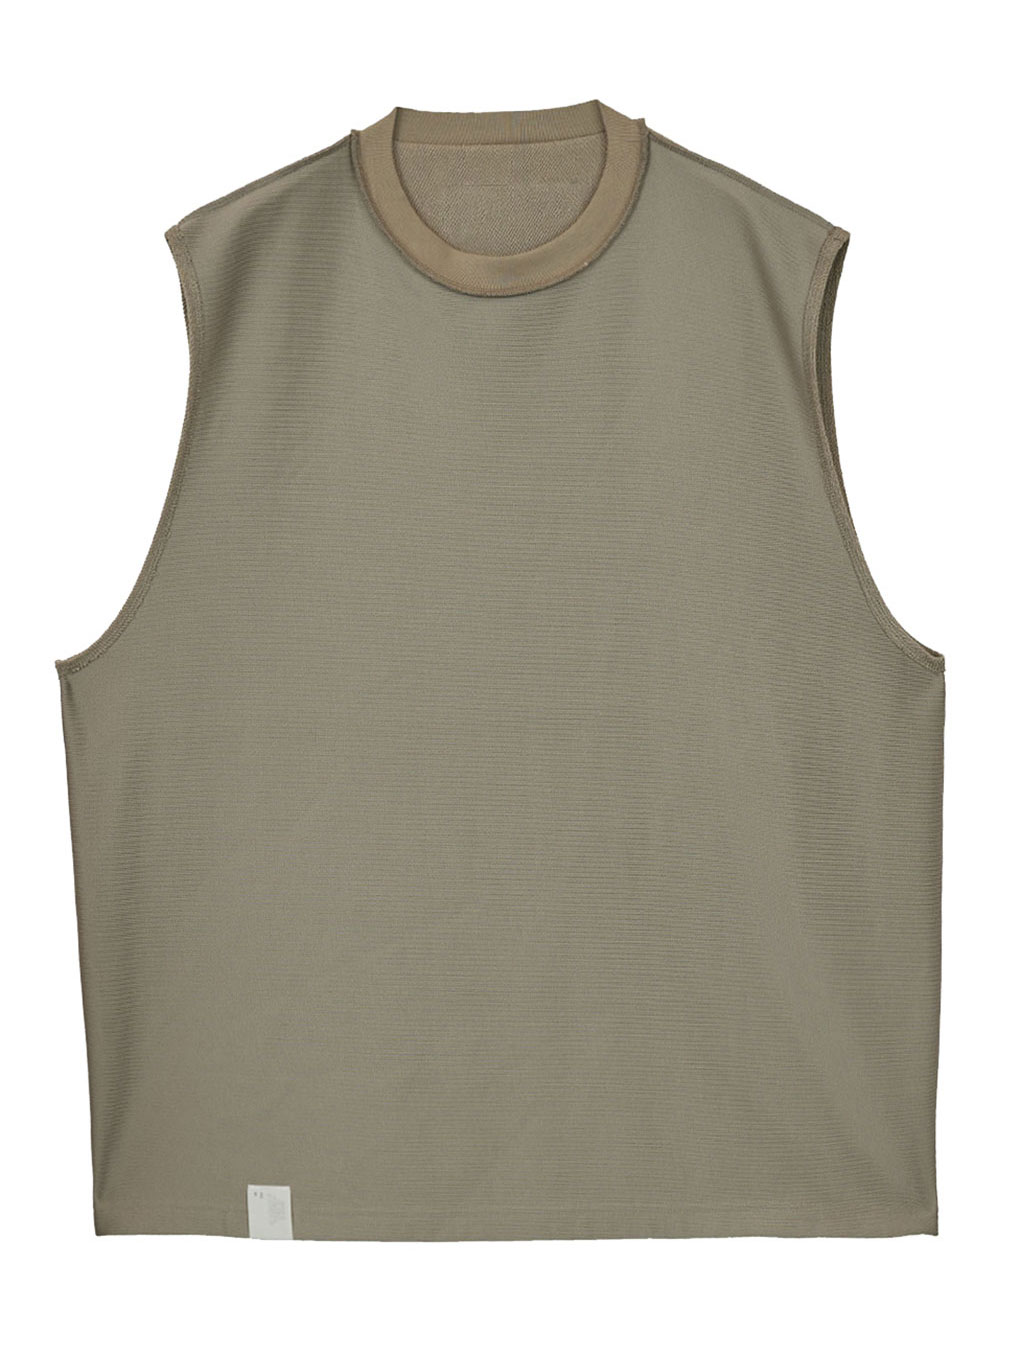 Ameri VINTAGE(アメリ ヴィンテージ)直営通販サイト / N.HOOLYWOOD for AMERI SIZE NAME TANK TOP